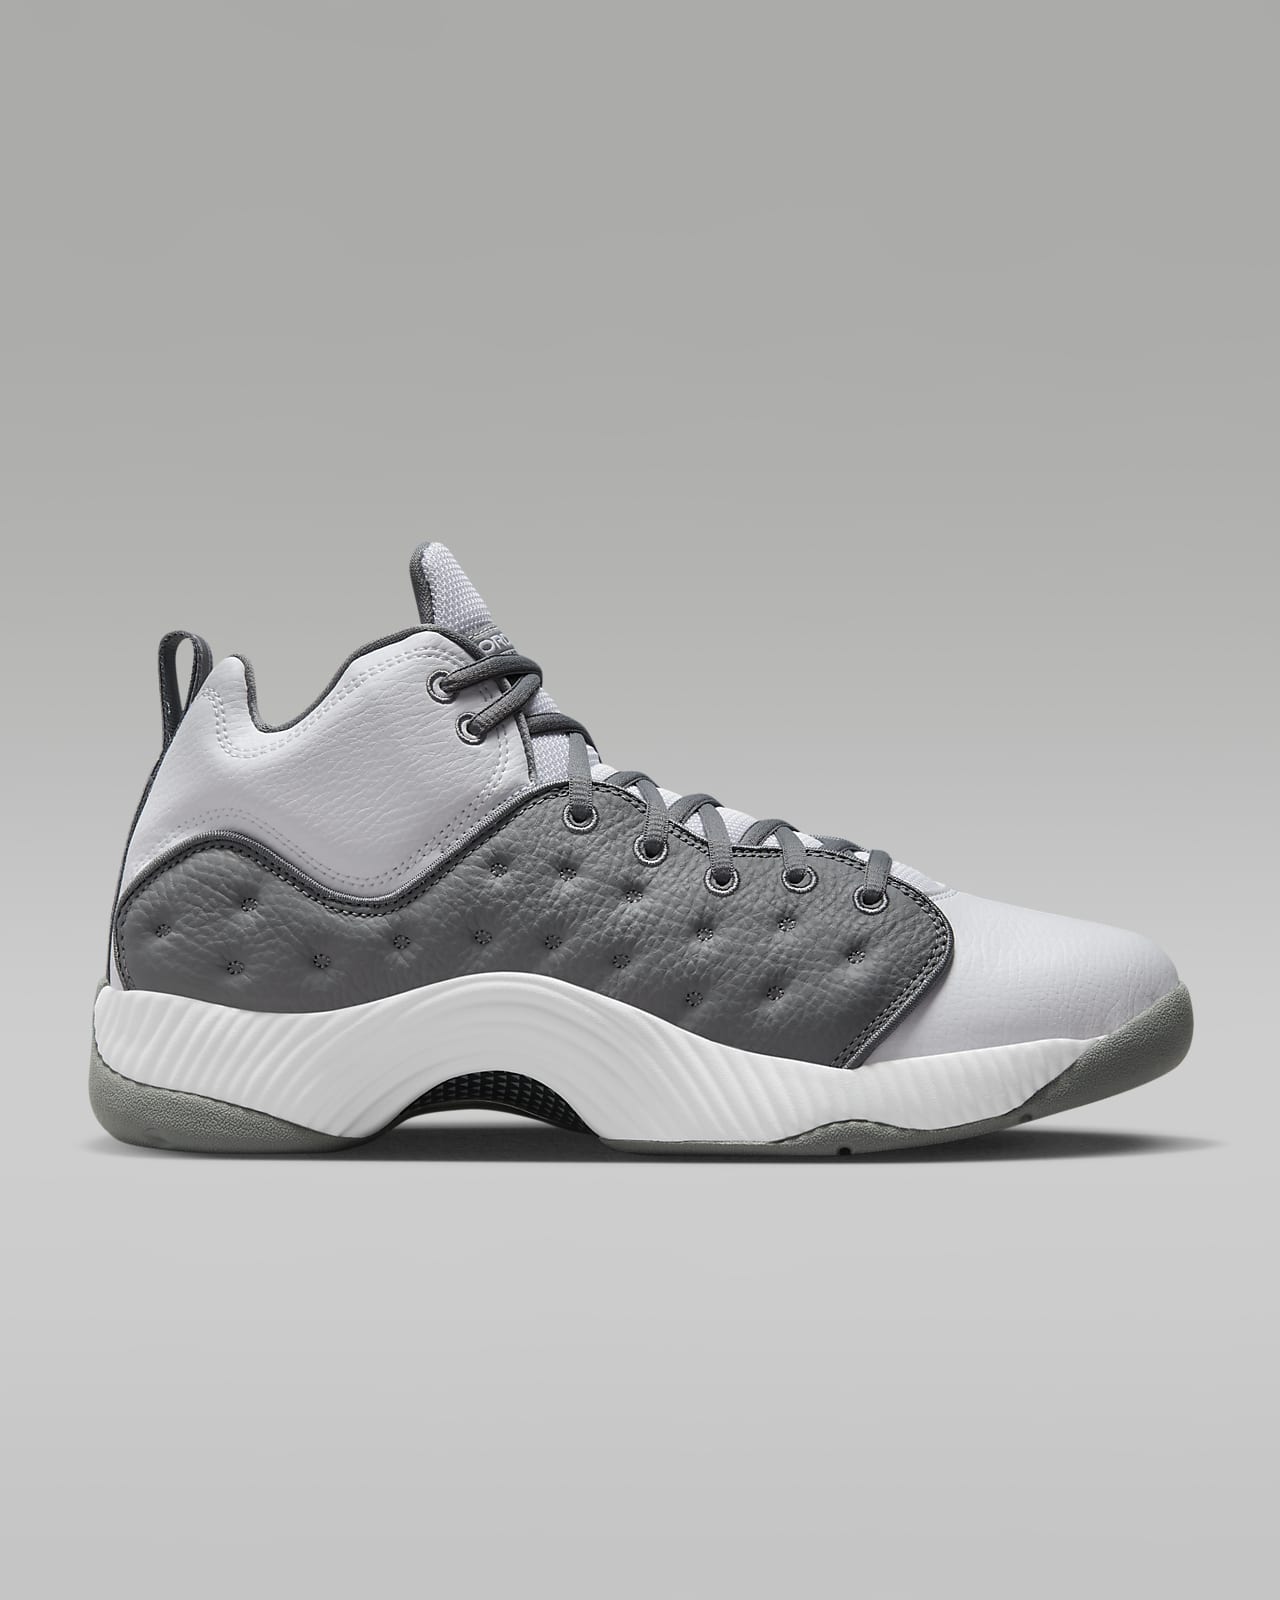 With Box Mens Trainers Jumpman Basketball Shoes Cool Grey 11